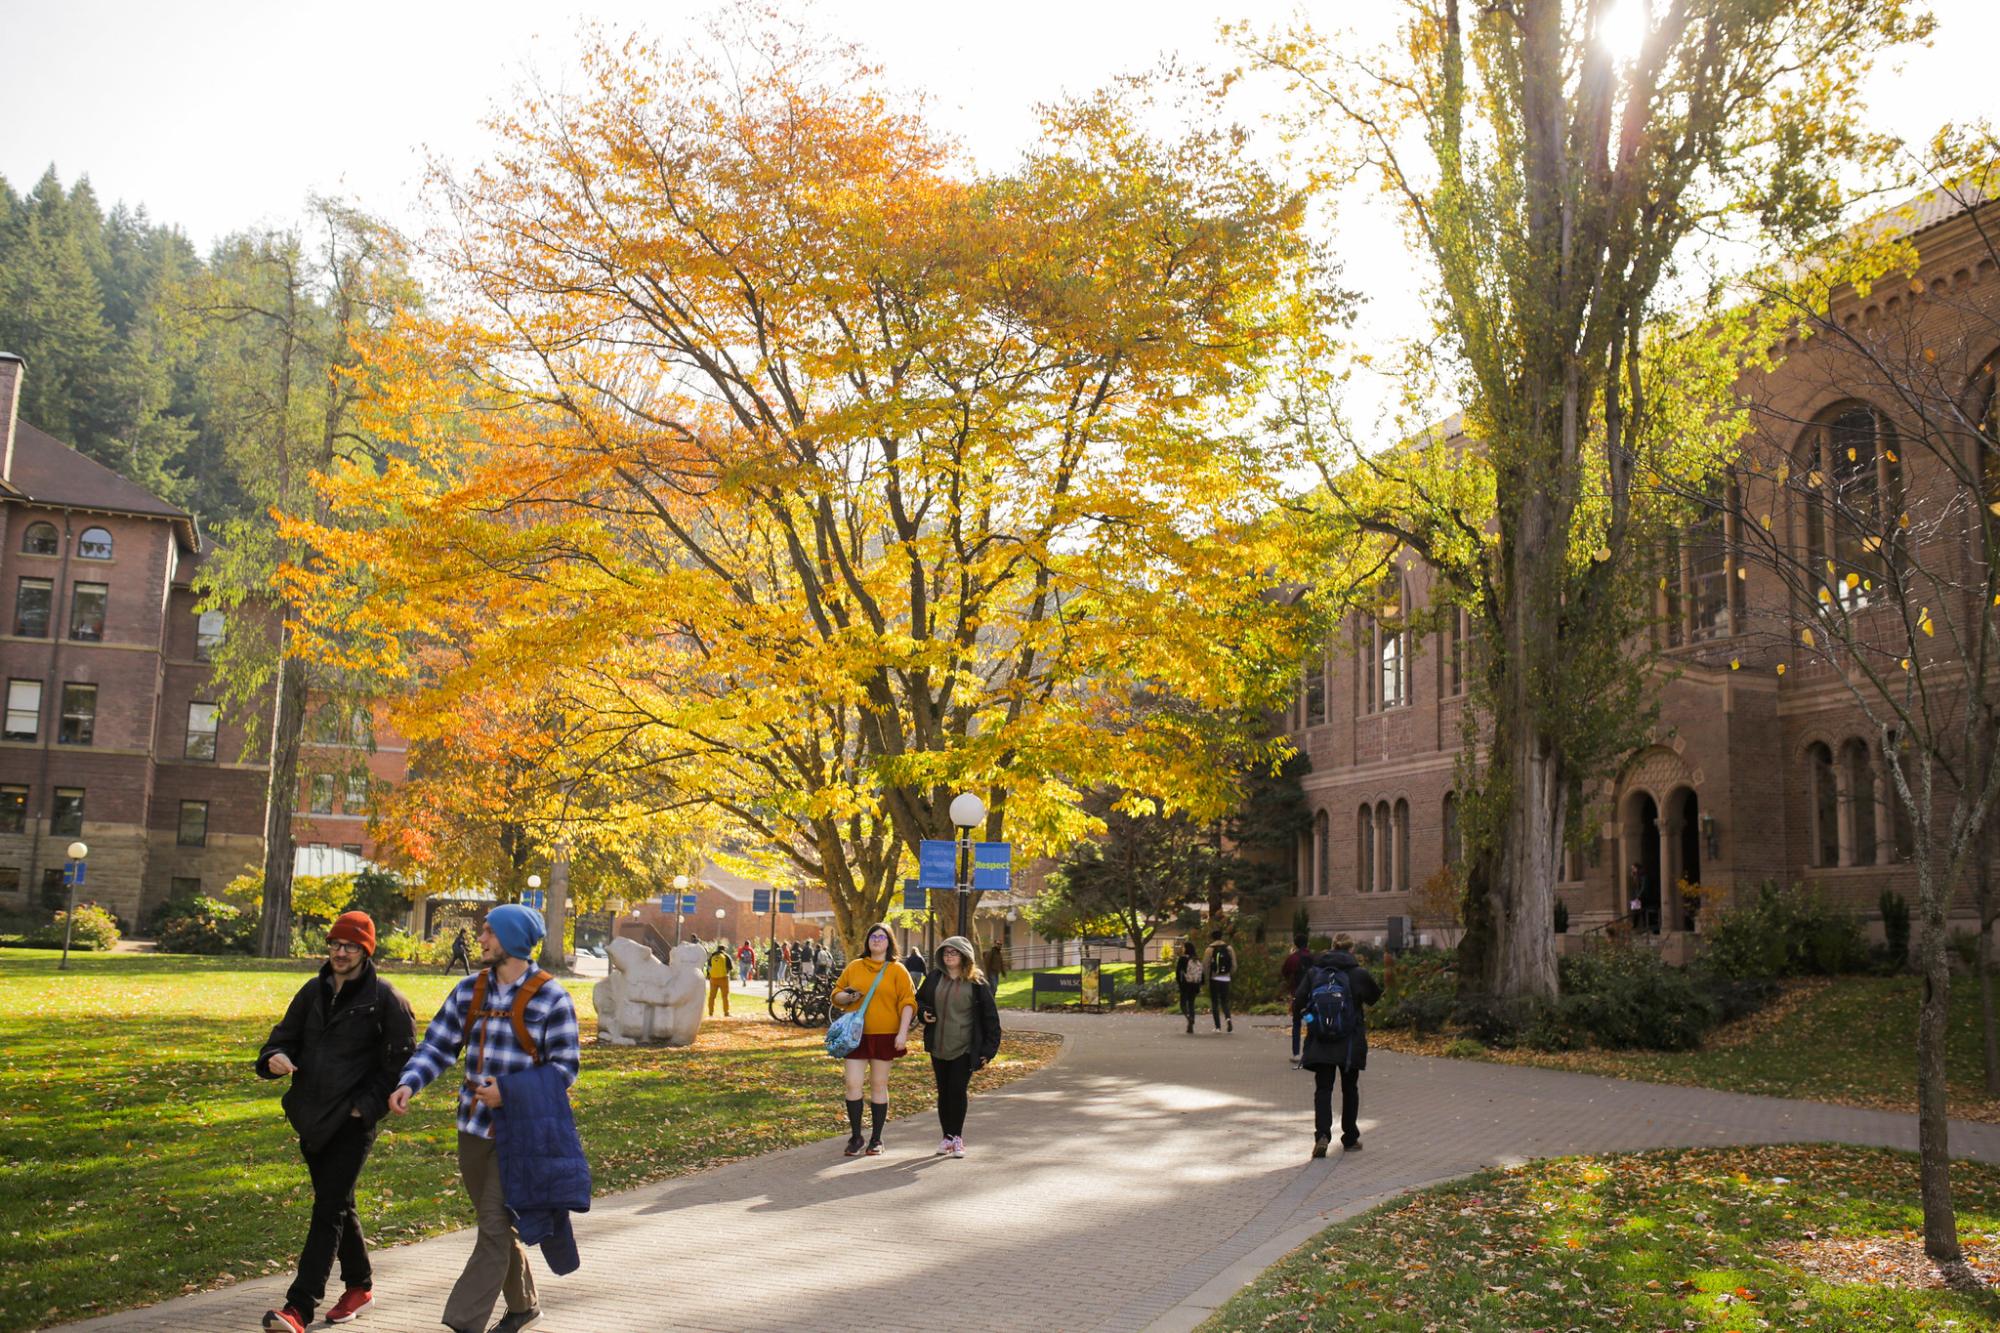 Students walking across campus under trees in fall